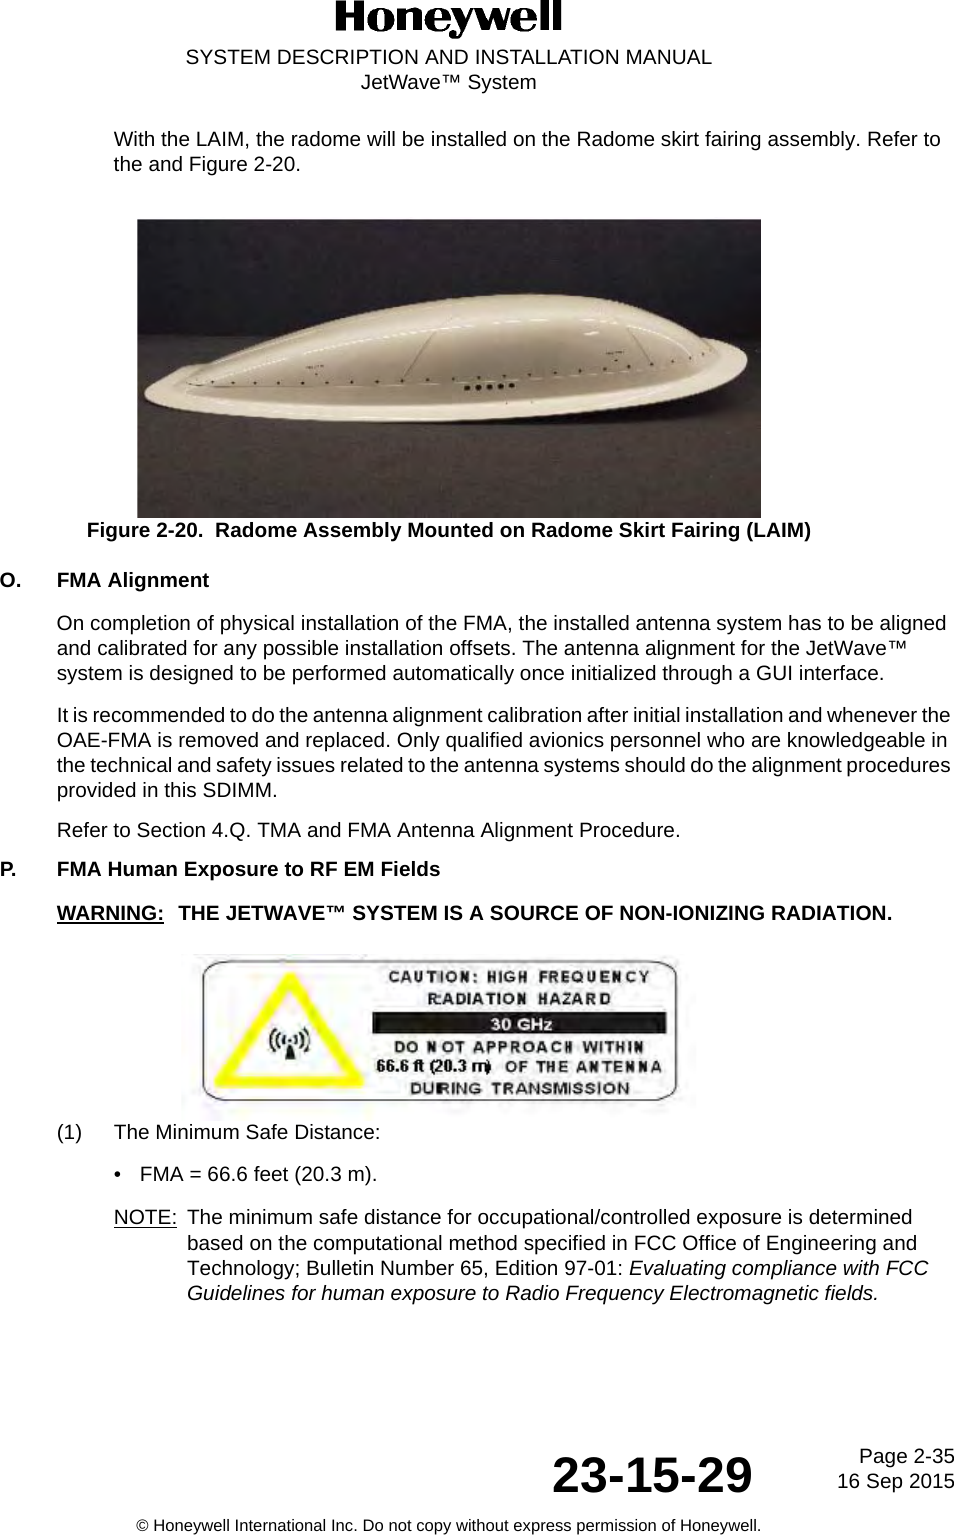 Page 2-35 16 Sep 201523-15-29SYSTEM DESCRIPTION AND INSTALLATION MANUALJetWave™ System© Honeywell International Inc. Do not copy without express permission of Honeywell.With the LAIM, the radome will be installed on the Radome skirt fairing assembly. Refer to the and Figure 2-20. Figure 2-20.  Radome Assembly Mounted on Radome Skirt Fairing (LAIM)O. FMA AlignmentOn completion of physical installation of the FMA, the installed antenna system has to be aligned and calibrated for any possible installation offsets. The antenna alignment for the JetWave™ system is designed to be performed automatically once initialized through a GUI interface.It is recommended to do the antenna alignment calibration after initial installation and whenever the OAE-FMA is removed and replaced. Only qualified avionics personnel who are knowledgeable in the technical and safety issues related to the antenna systems should do the alignment procedures provided in this SDIMM.Refer to Section 4.Q. TMA and FMA Antenna Alignment Procedure.P. FMA Human Exposure to RF EM FieldsWARNING: THE JETWAVE™ SYSTEM IS A SOURCE OF NON-IONIZING RADIATION.(1) The Minimum Safe Distance:• FMA = 66.6 feet (20.3 m).NOTE: The minimum safe distance for occupational/controlled exposure is determined based on the computational method specified in FCC Office of Engineering and Technology; Bulletin Number 65, Edition 97-01: Evaluating compliance with FCC Guidelines for human exposure to Radio Frequency Electromagnetic fields.